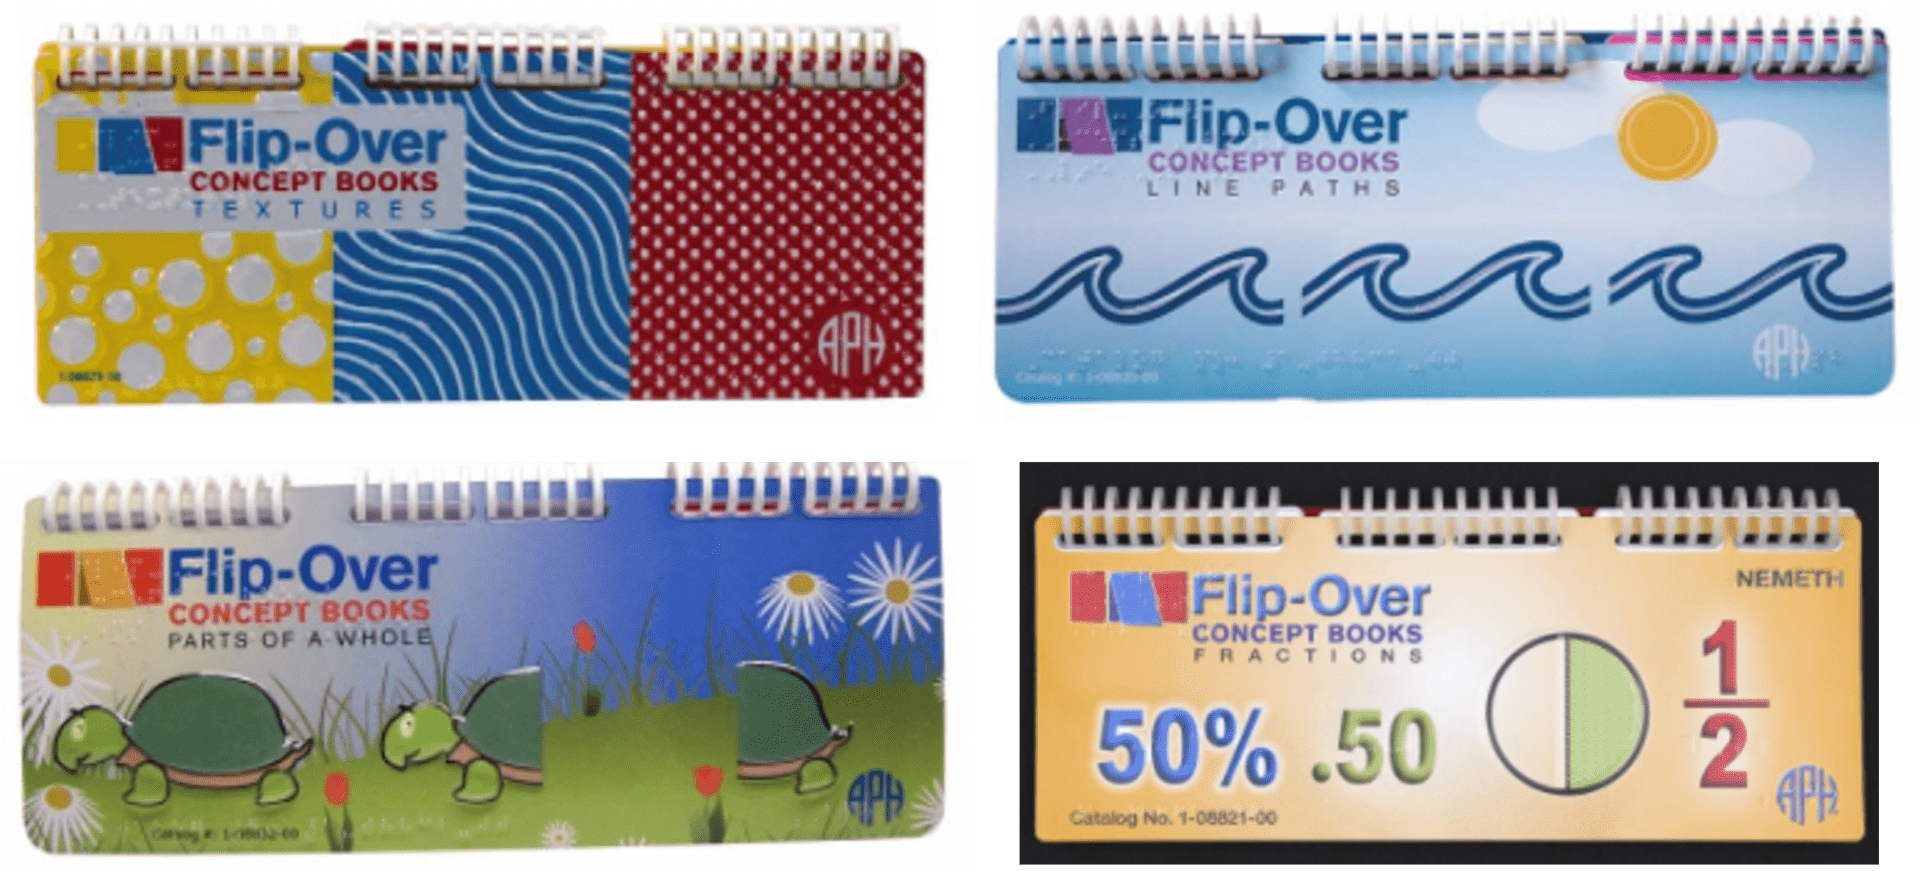 Collage of four Flip-Over Concept Books covers: Textures, Line Paths, Parts of a Whole, and Fractions